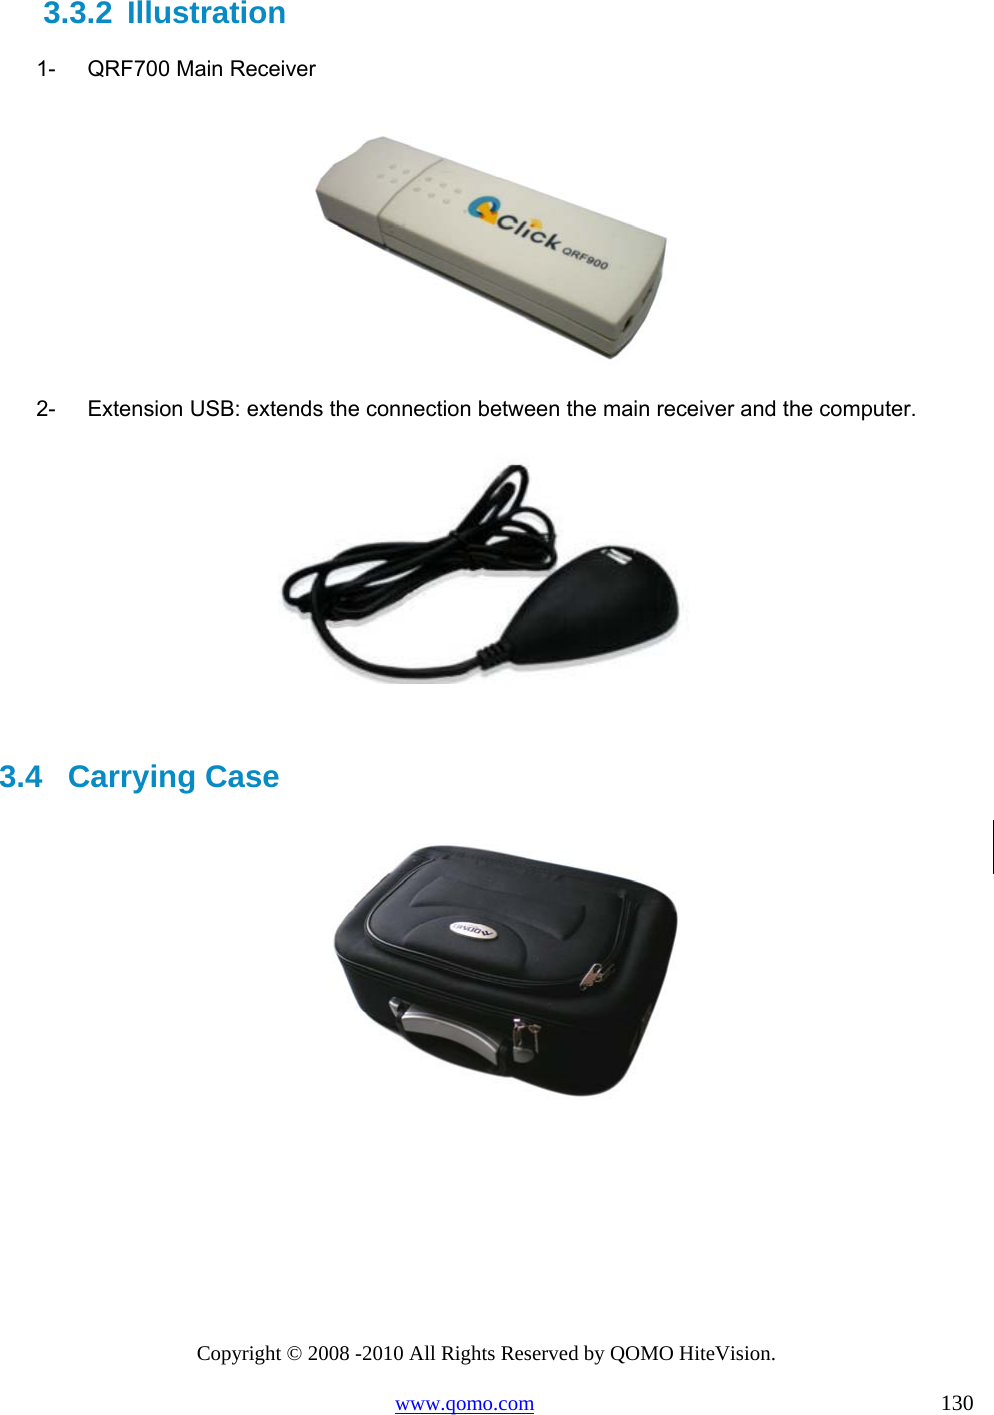 Copyright © 2008 -2010 All Rights Reserved by QOMO HiteVision. www.qomo.com                                                                          130 3.3.2  Illustration 1-  QRF700 Main Receiver  2-  Extension USB: extends the connection between the main receiver and the computer.   3.4   Carrying Case      